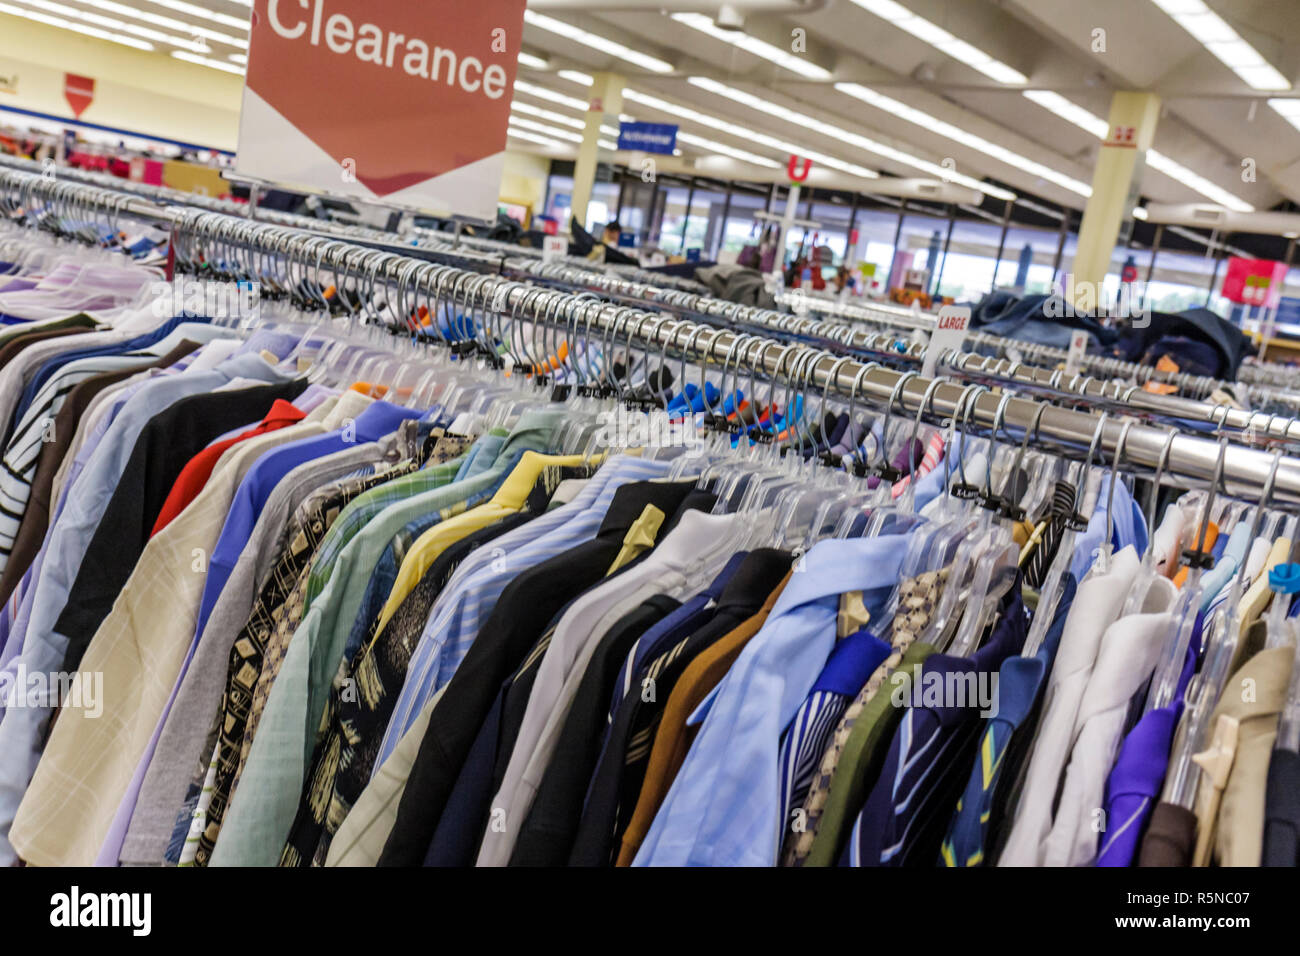 Miami Florida,Marshalls Department Store,discount department store,off price,man's,men's shirts,clothes rack,hanger,luxury,well dressed,variety,shoppi Stock Photo